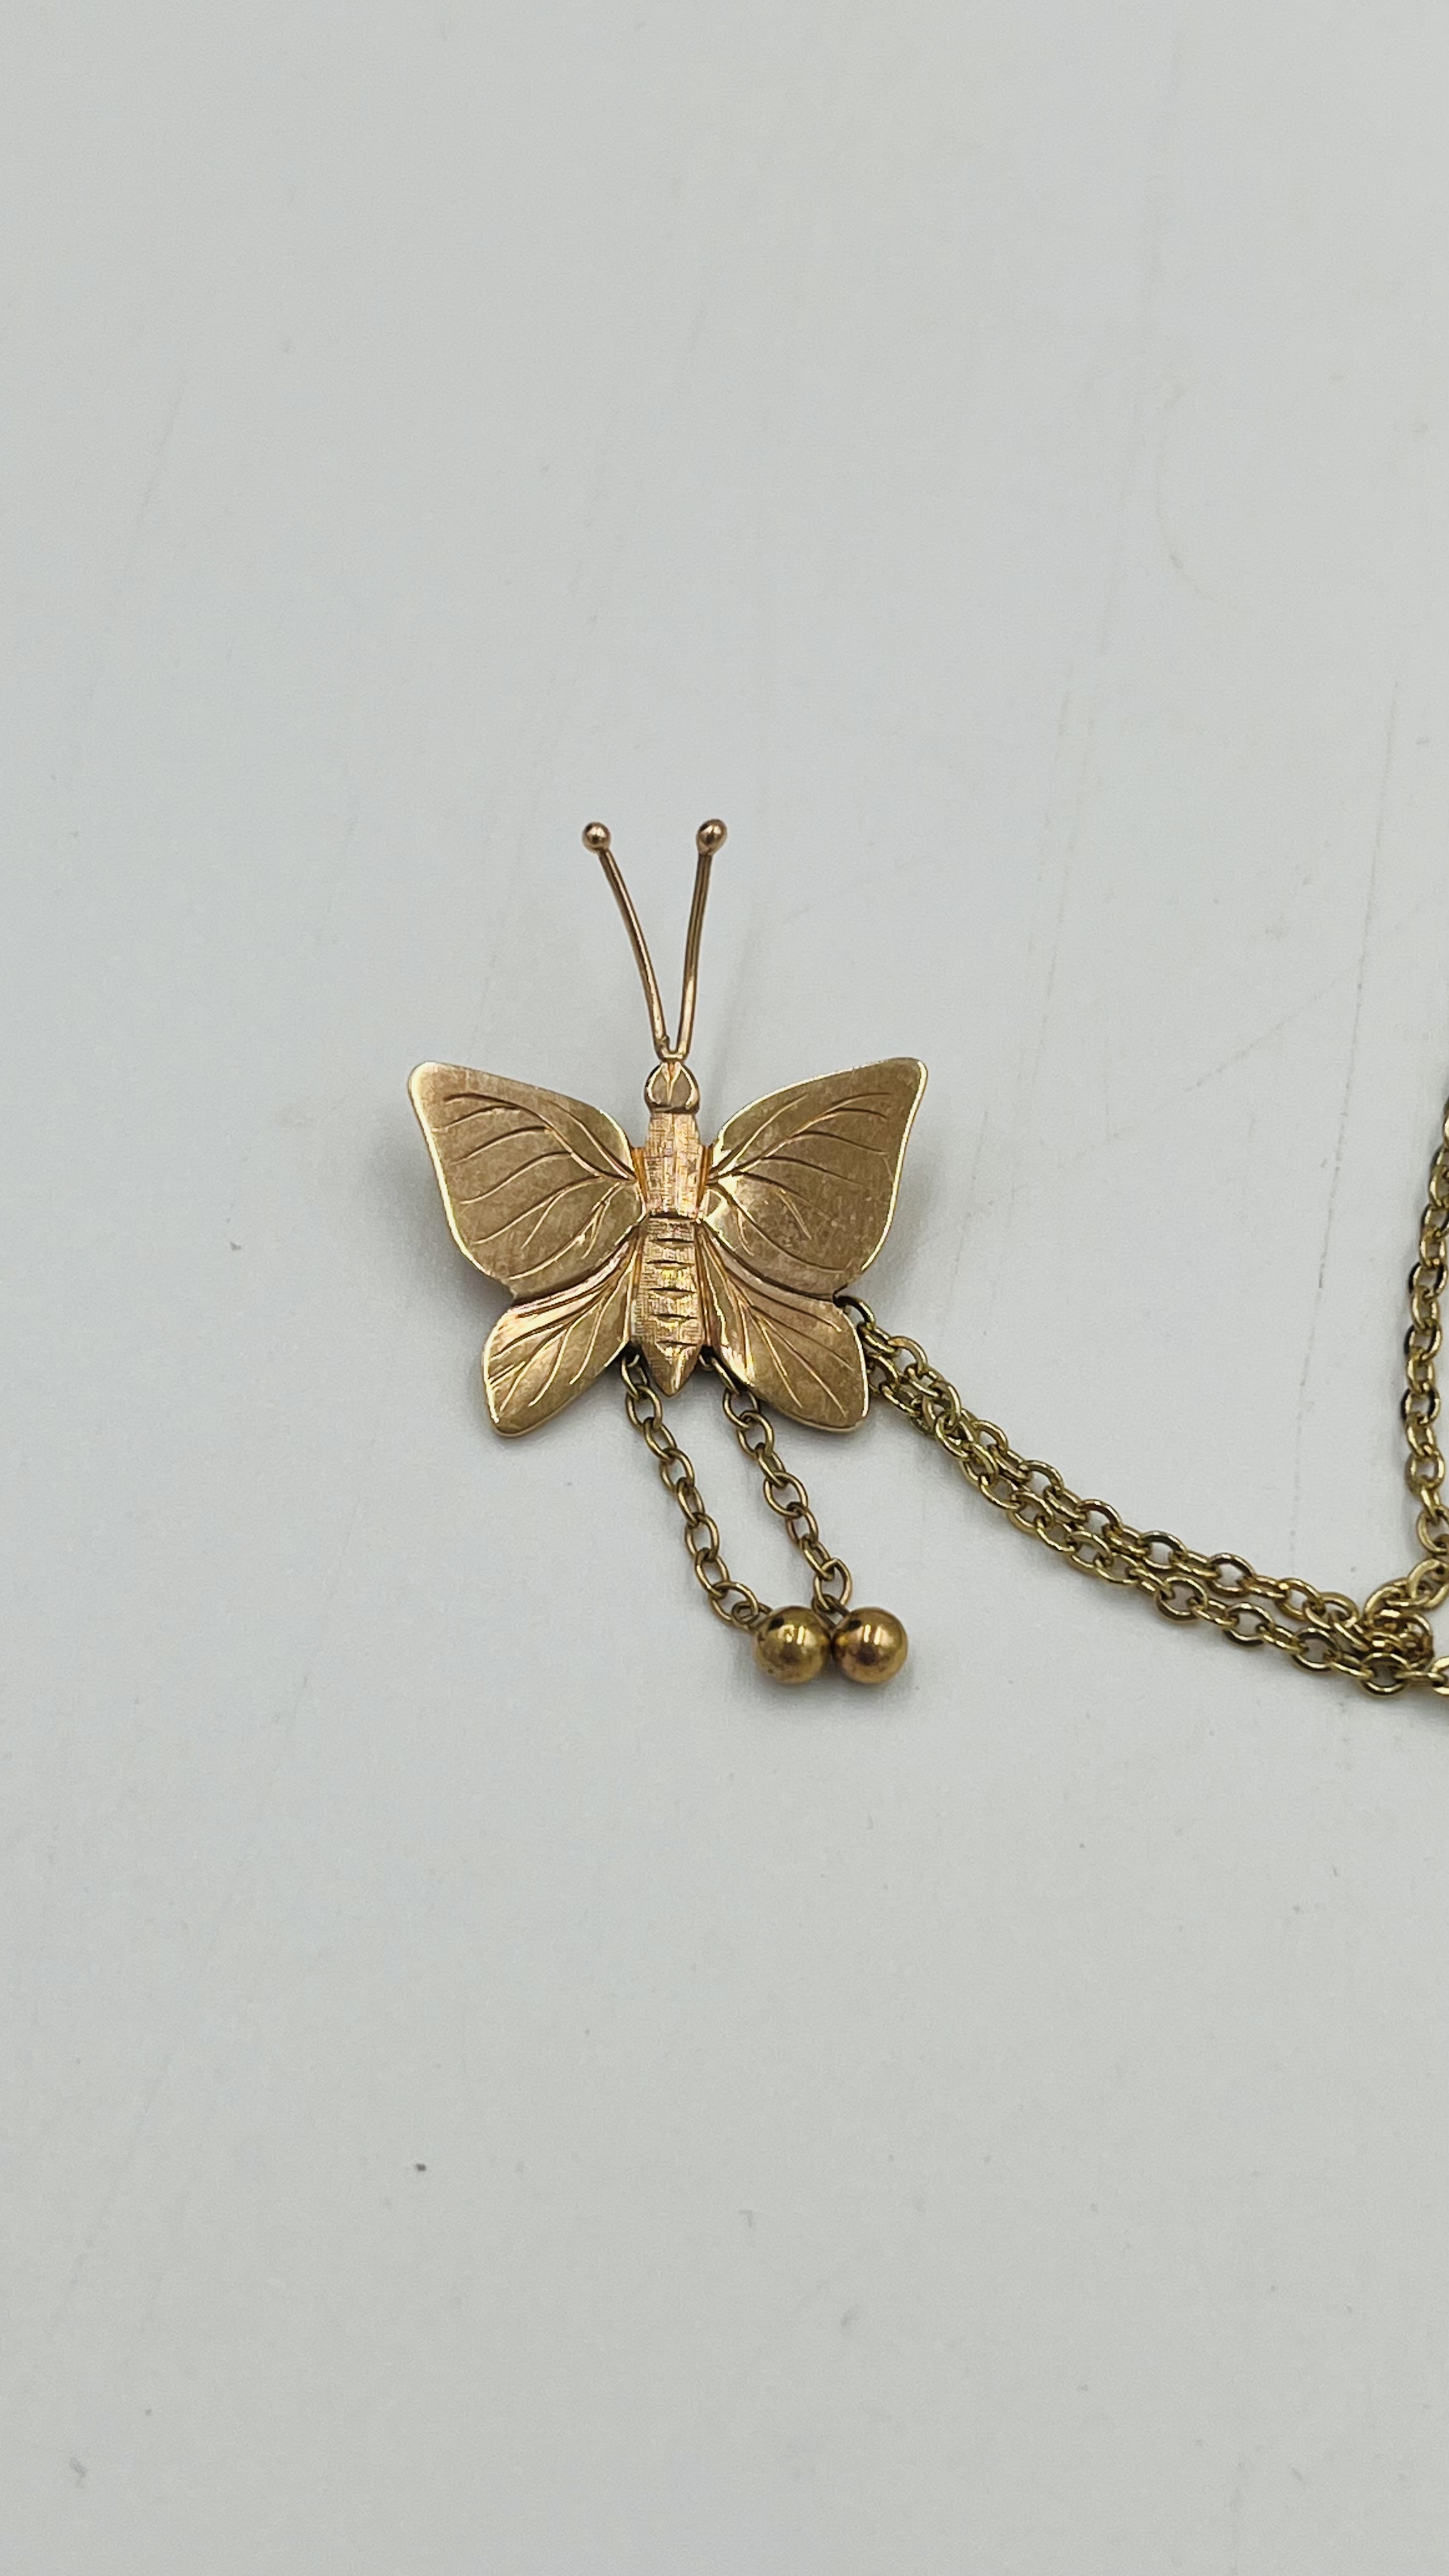 9ct gold pendant together with a 9ct gold pair of earrings - Image 4 of 4